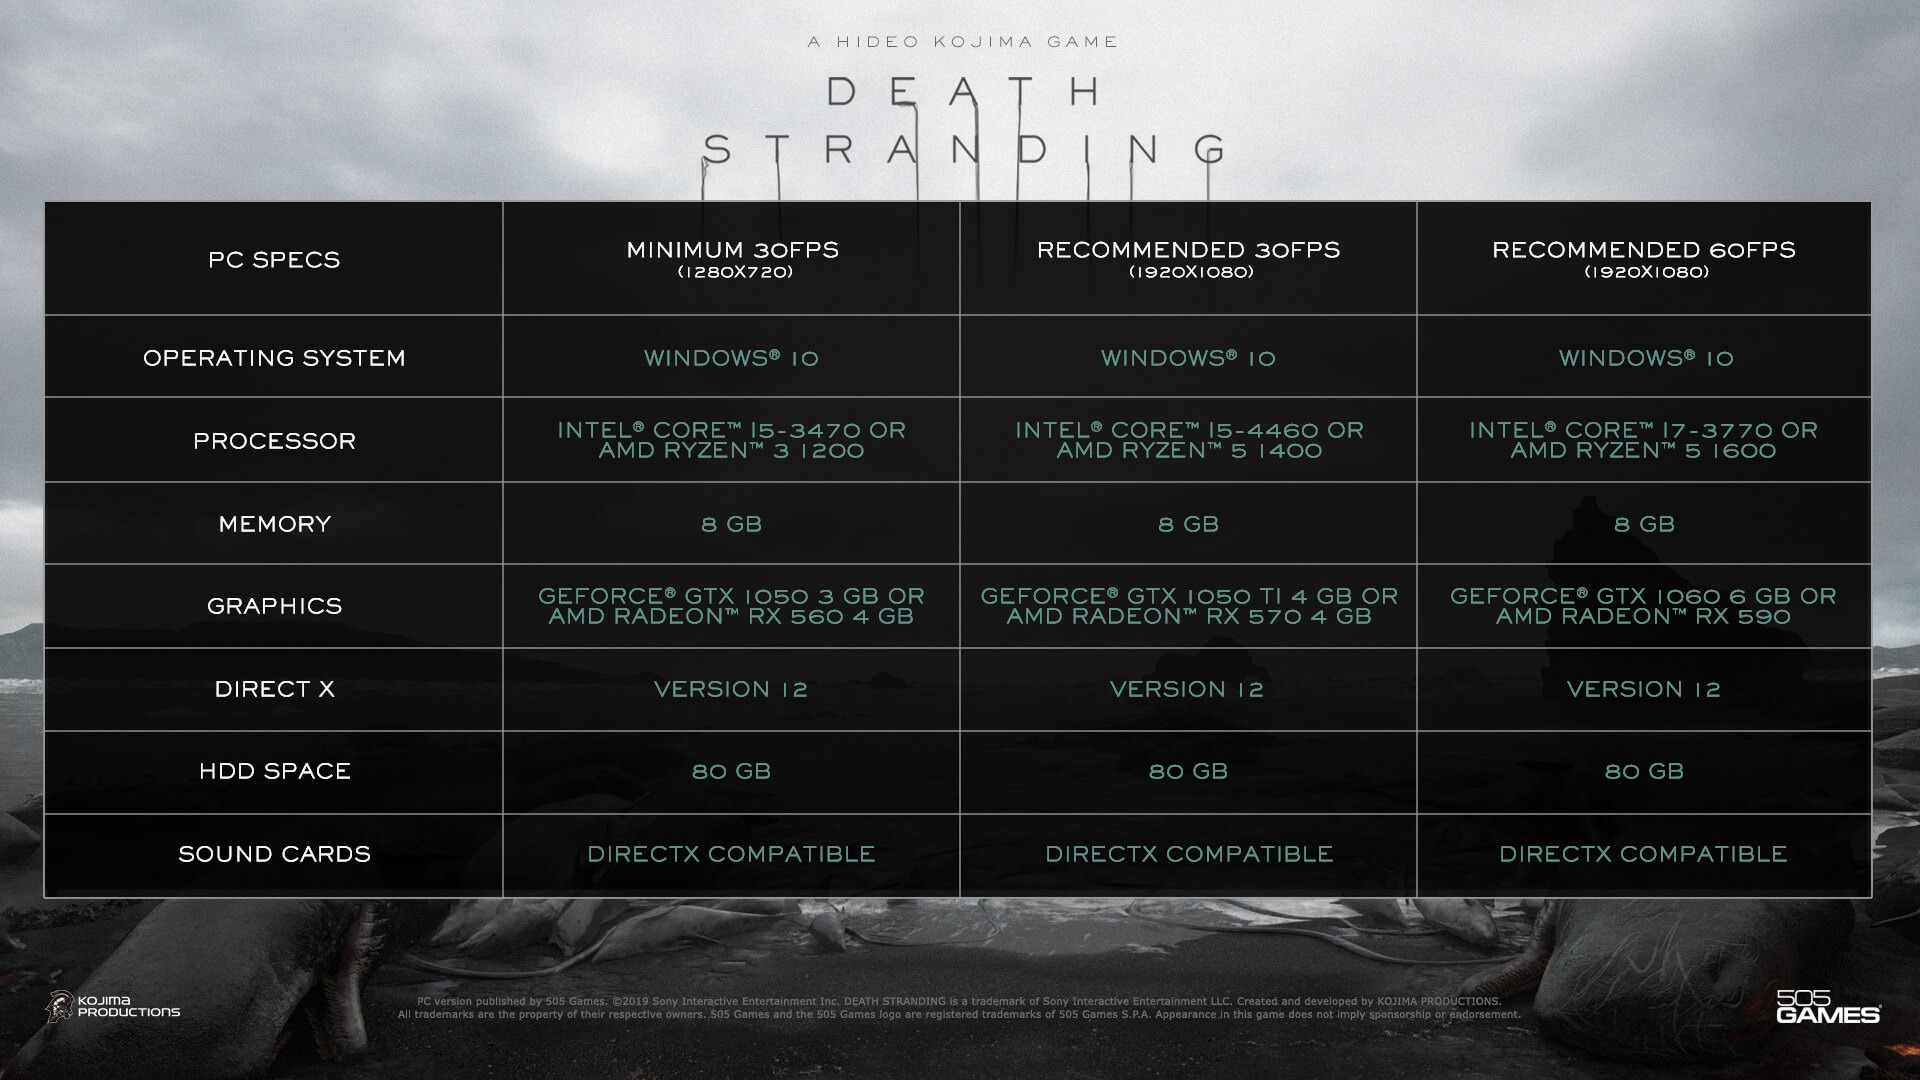 Death Stranding is now free on Epic Games: How to claim